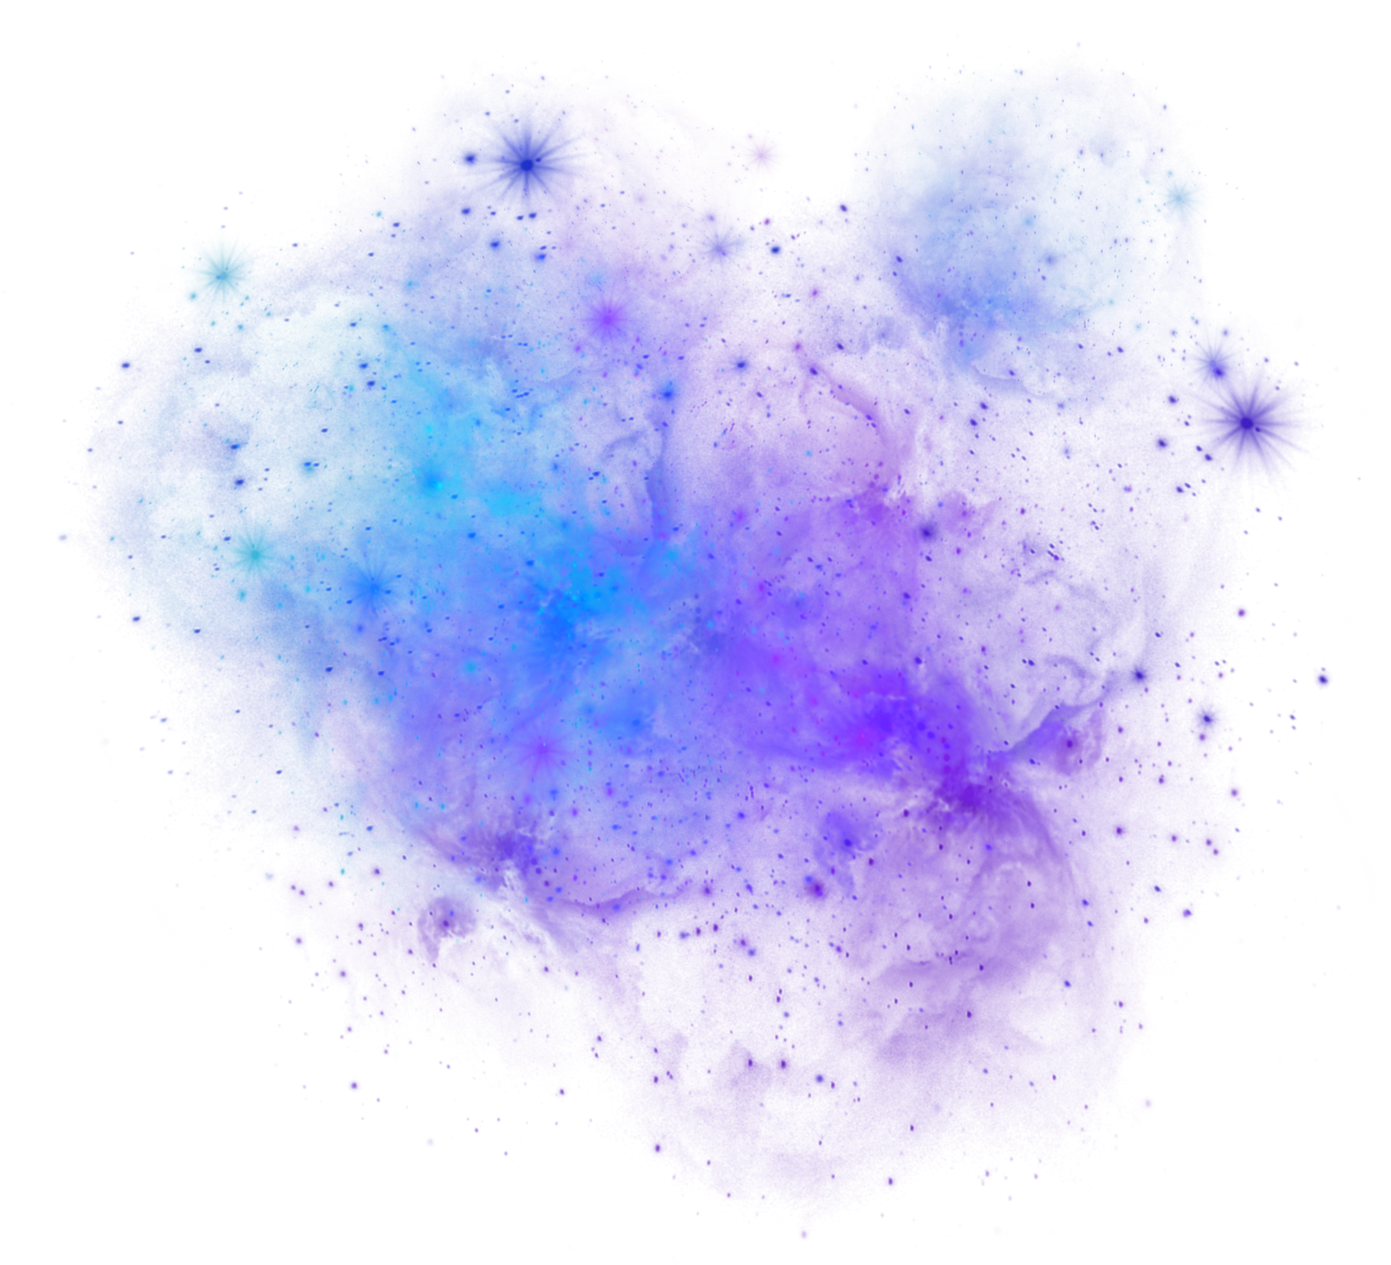 Blue Violet & Green Space Galaxy Overlay Background